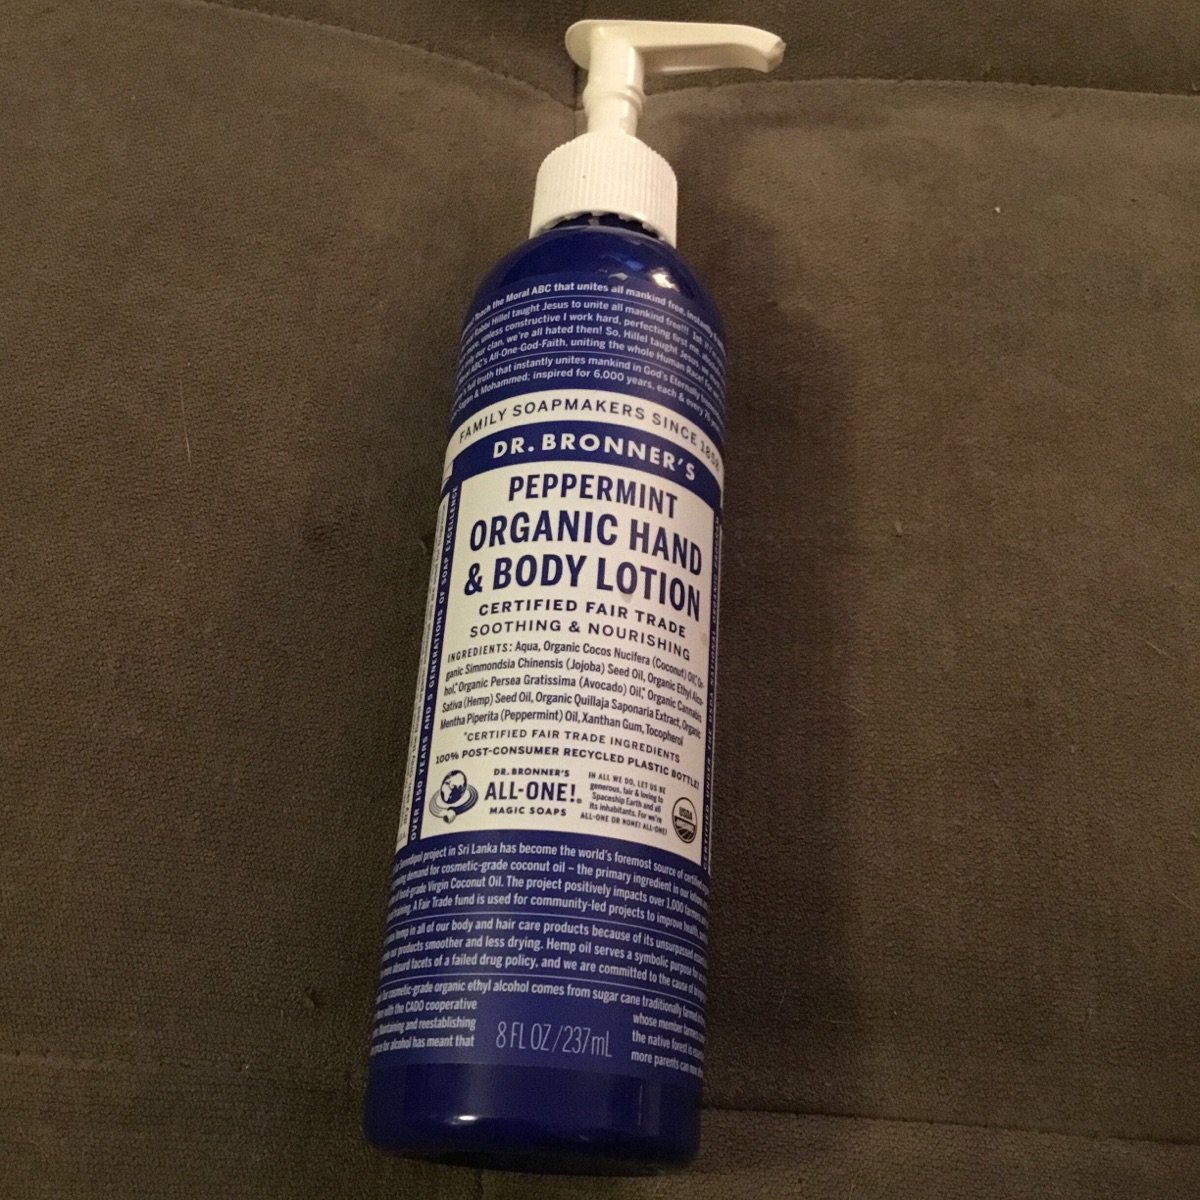 Dr. Bronner's Peppermint Organic Hand & Body Lotion Reviews | abillion